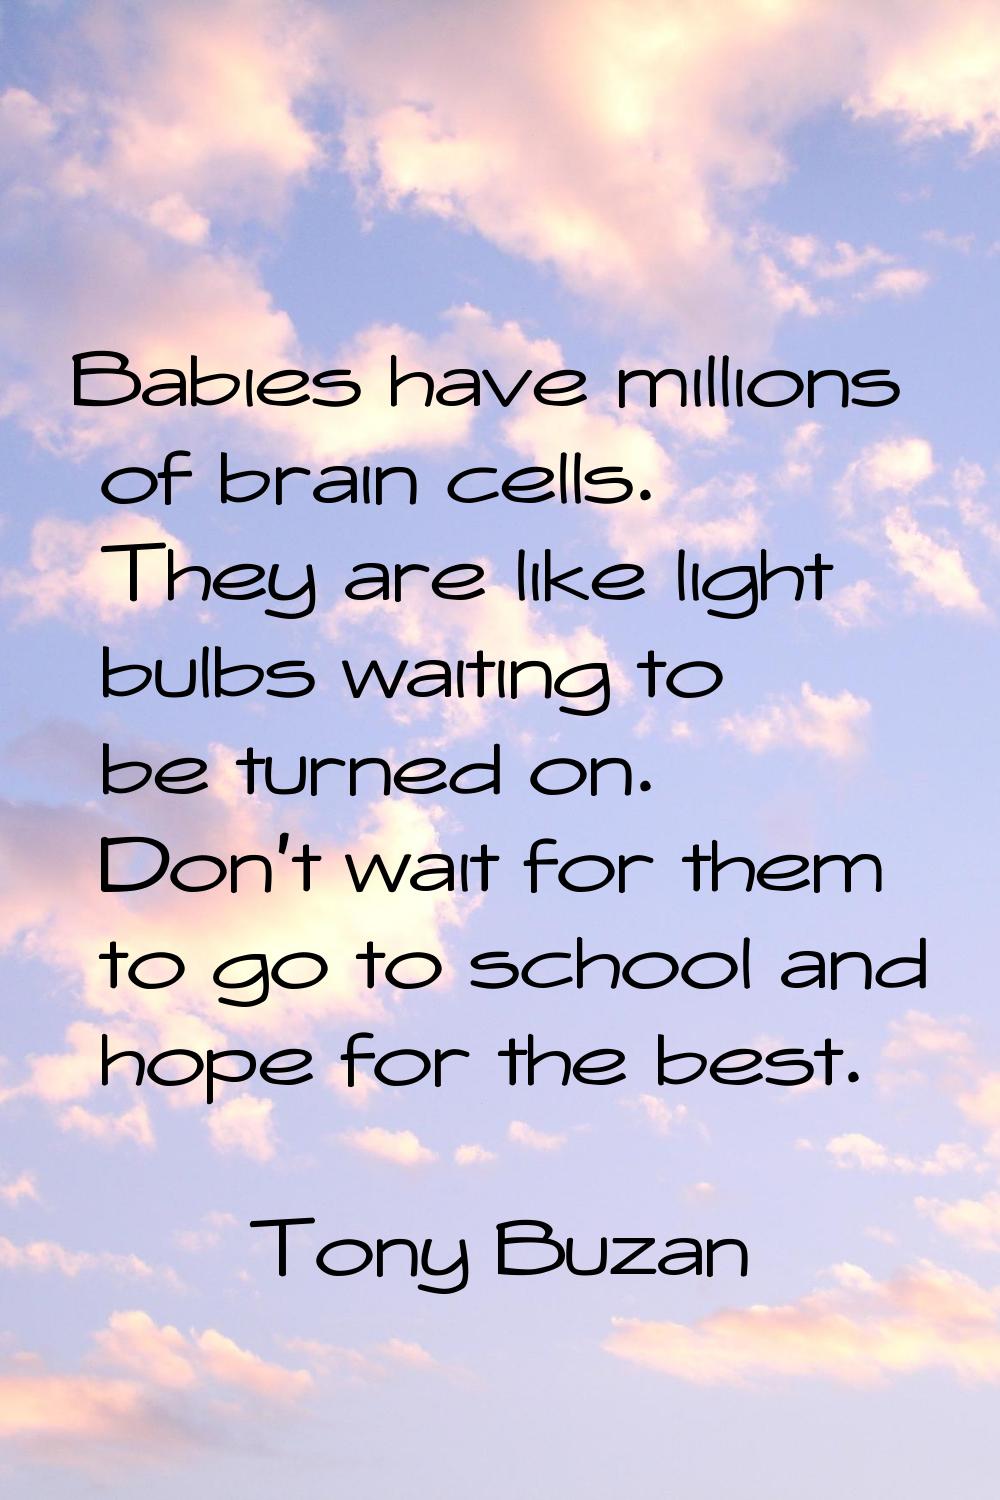 Babies have millions of brain cells. They are like light bulbs waiting to be turned on. Don't wait 